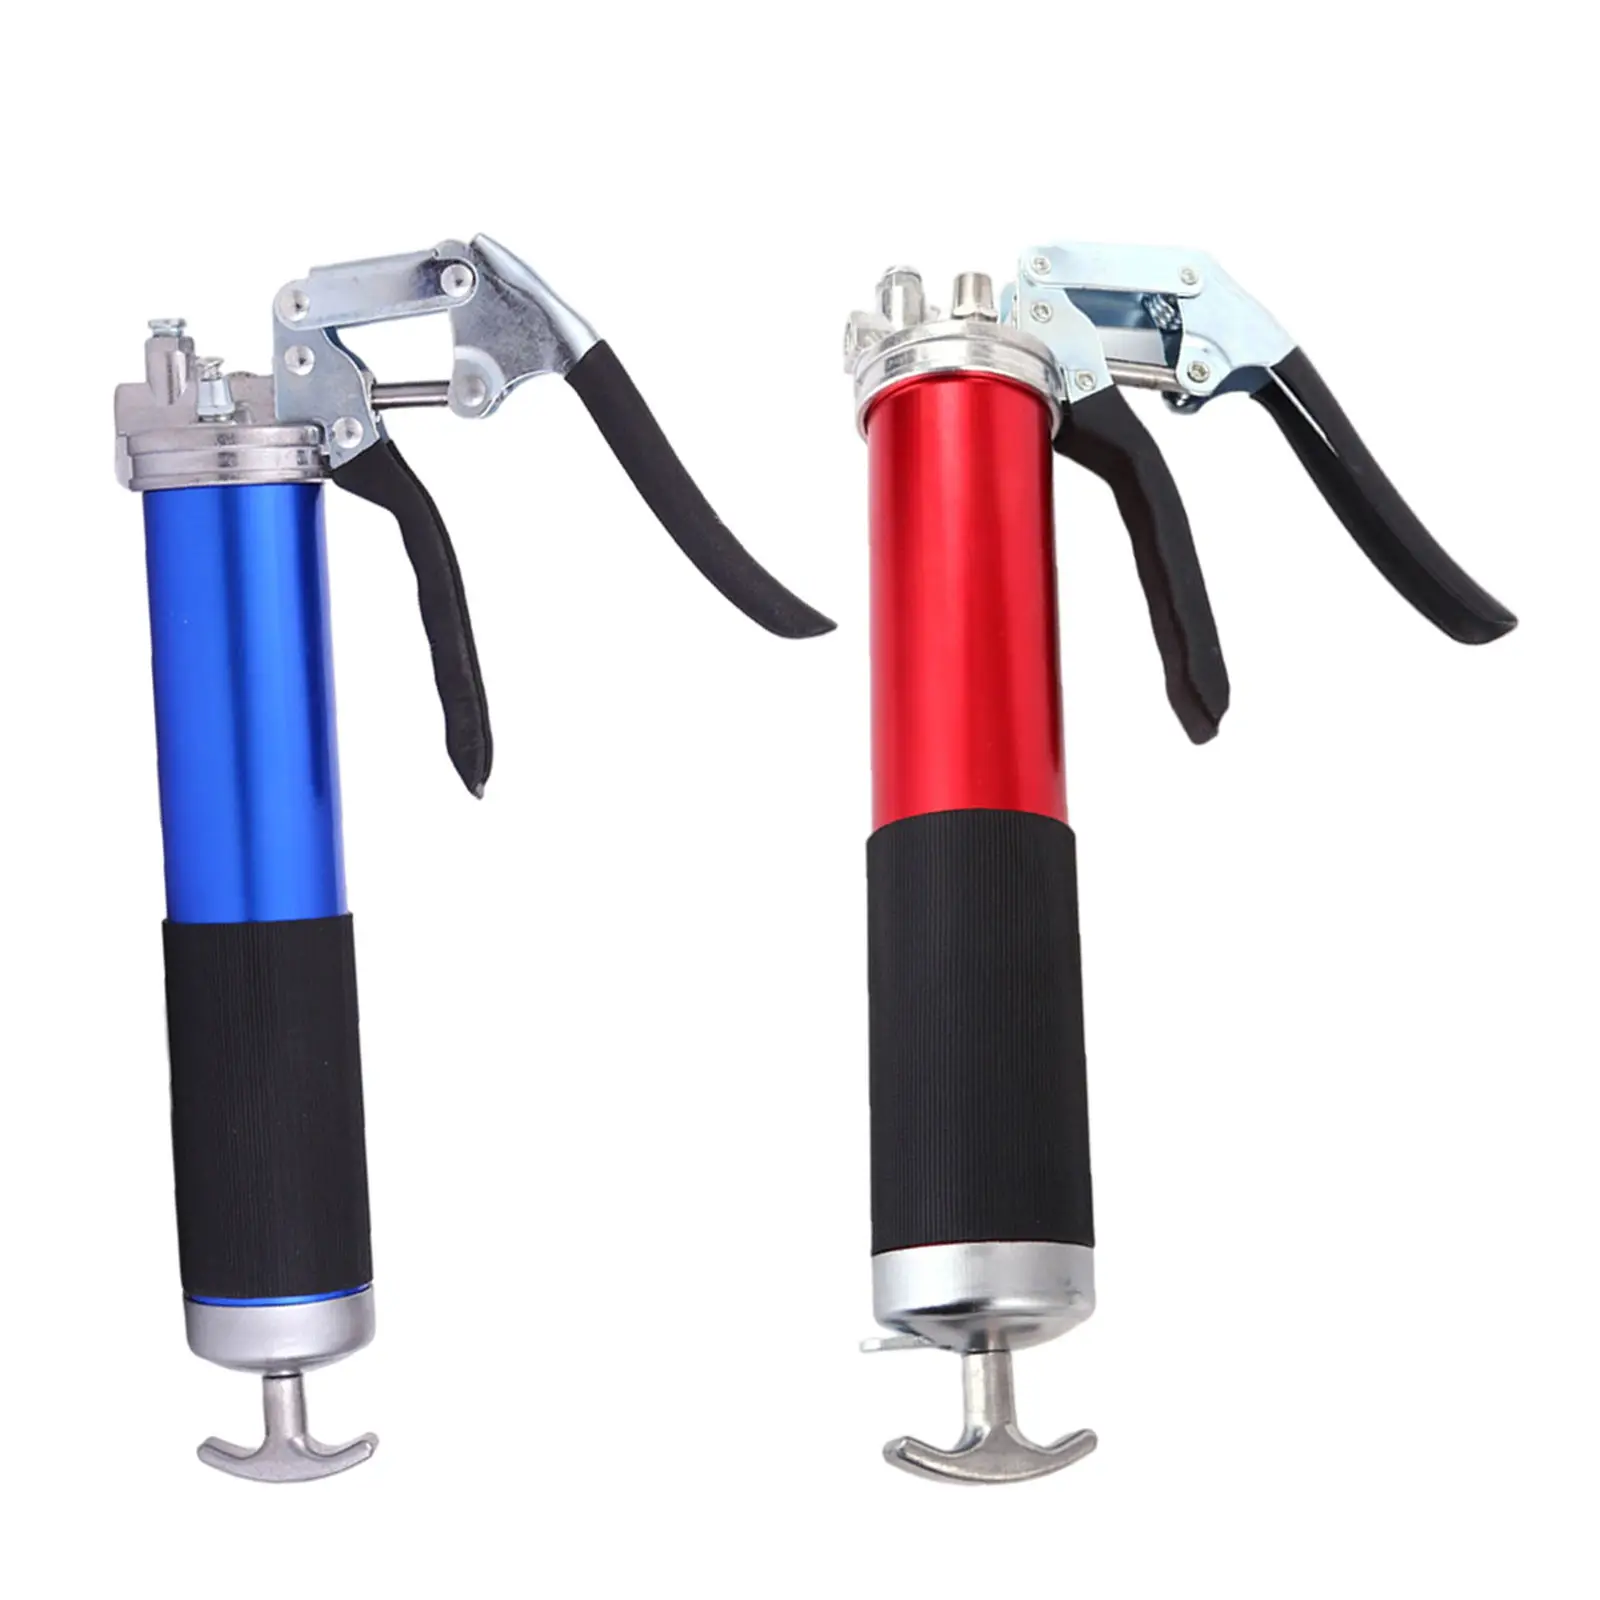 Heavy Duty Metal High Pressure 10000 PSI 400cc Grip Grease Gun Greasing Injection W/ Hose for Automobile Tool